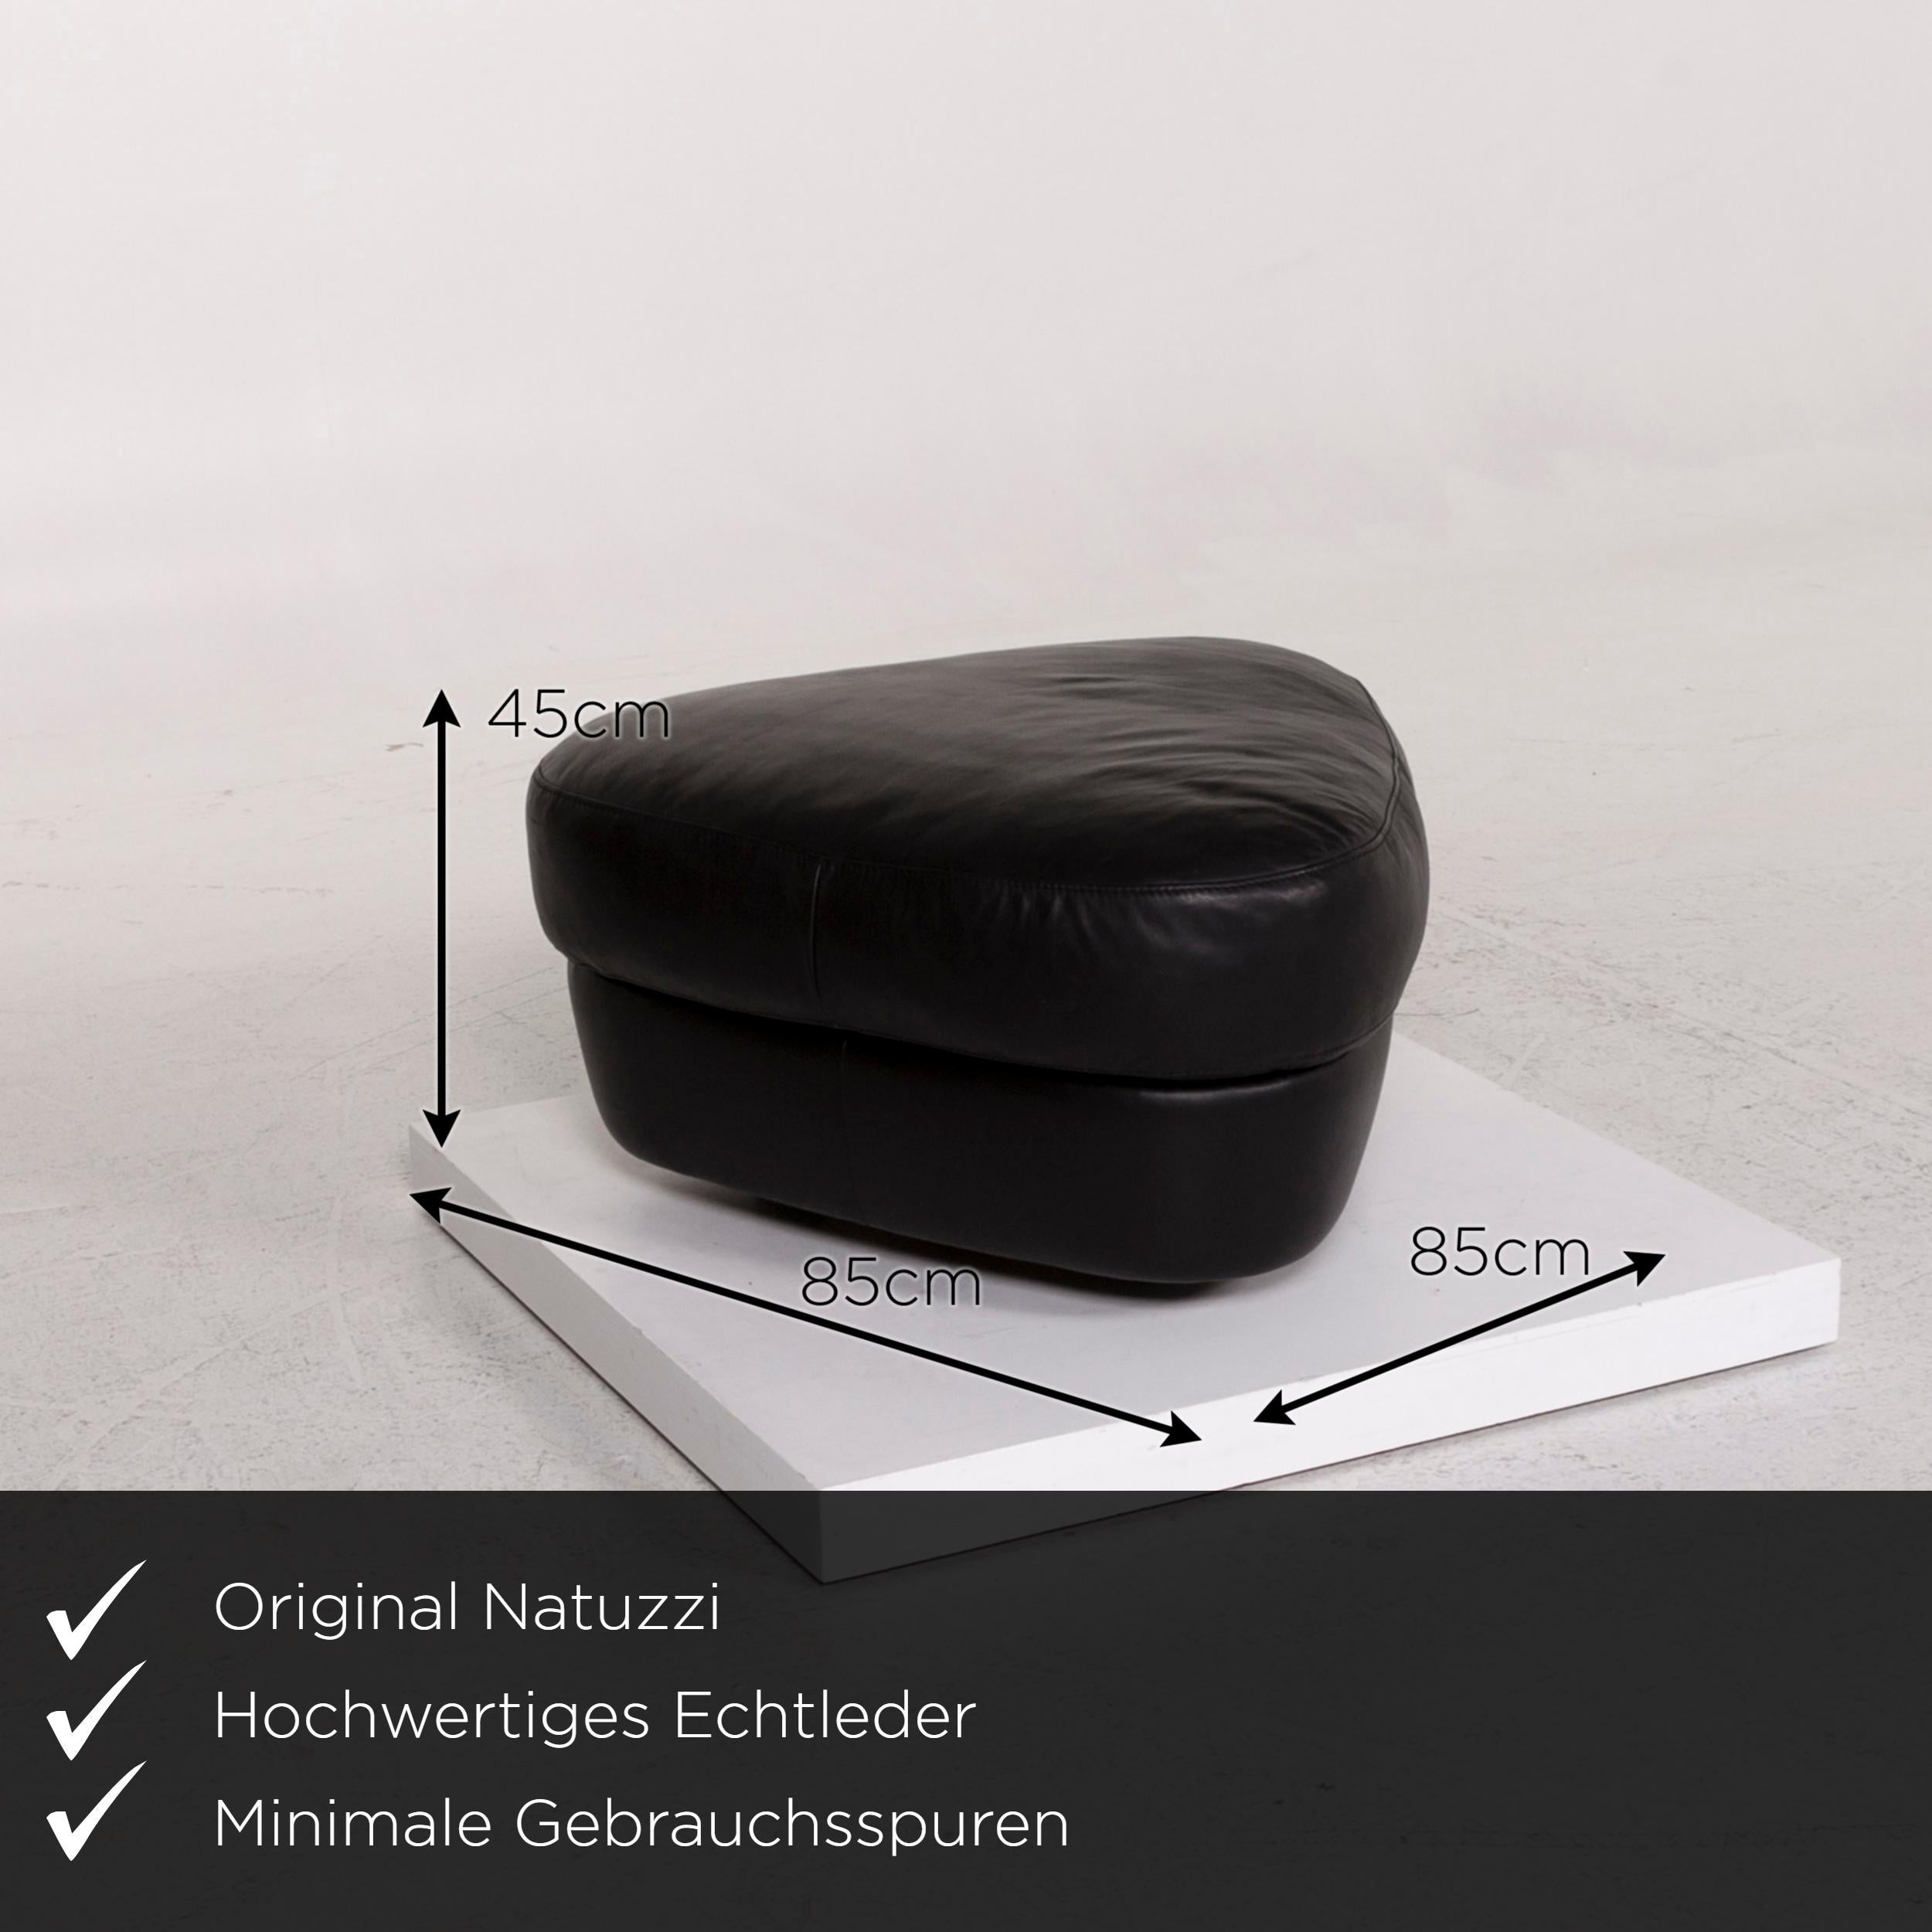 We bring to you a Natuzzi leather stool black stool ottoman.

 

 Product measurements in centimeters:
 

Depth 85
Width 85
Height 45.





 